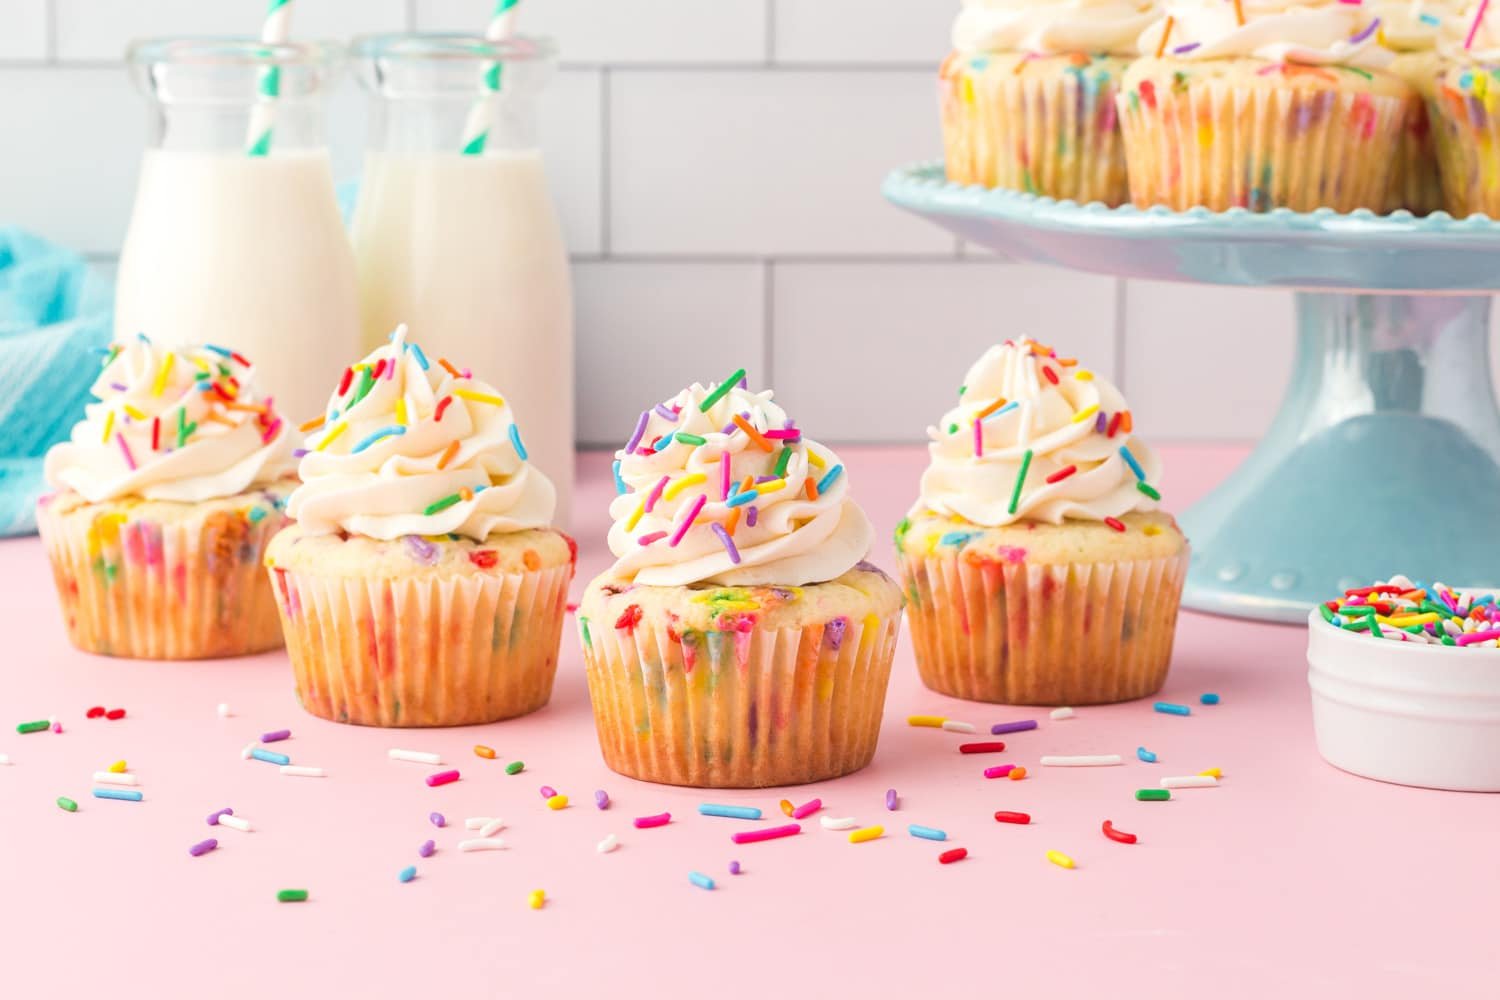 Four Funfetti cupcakes with vanilla buttercream icing on a pink background with sprinkles